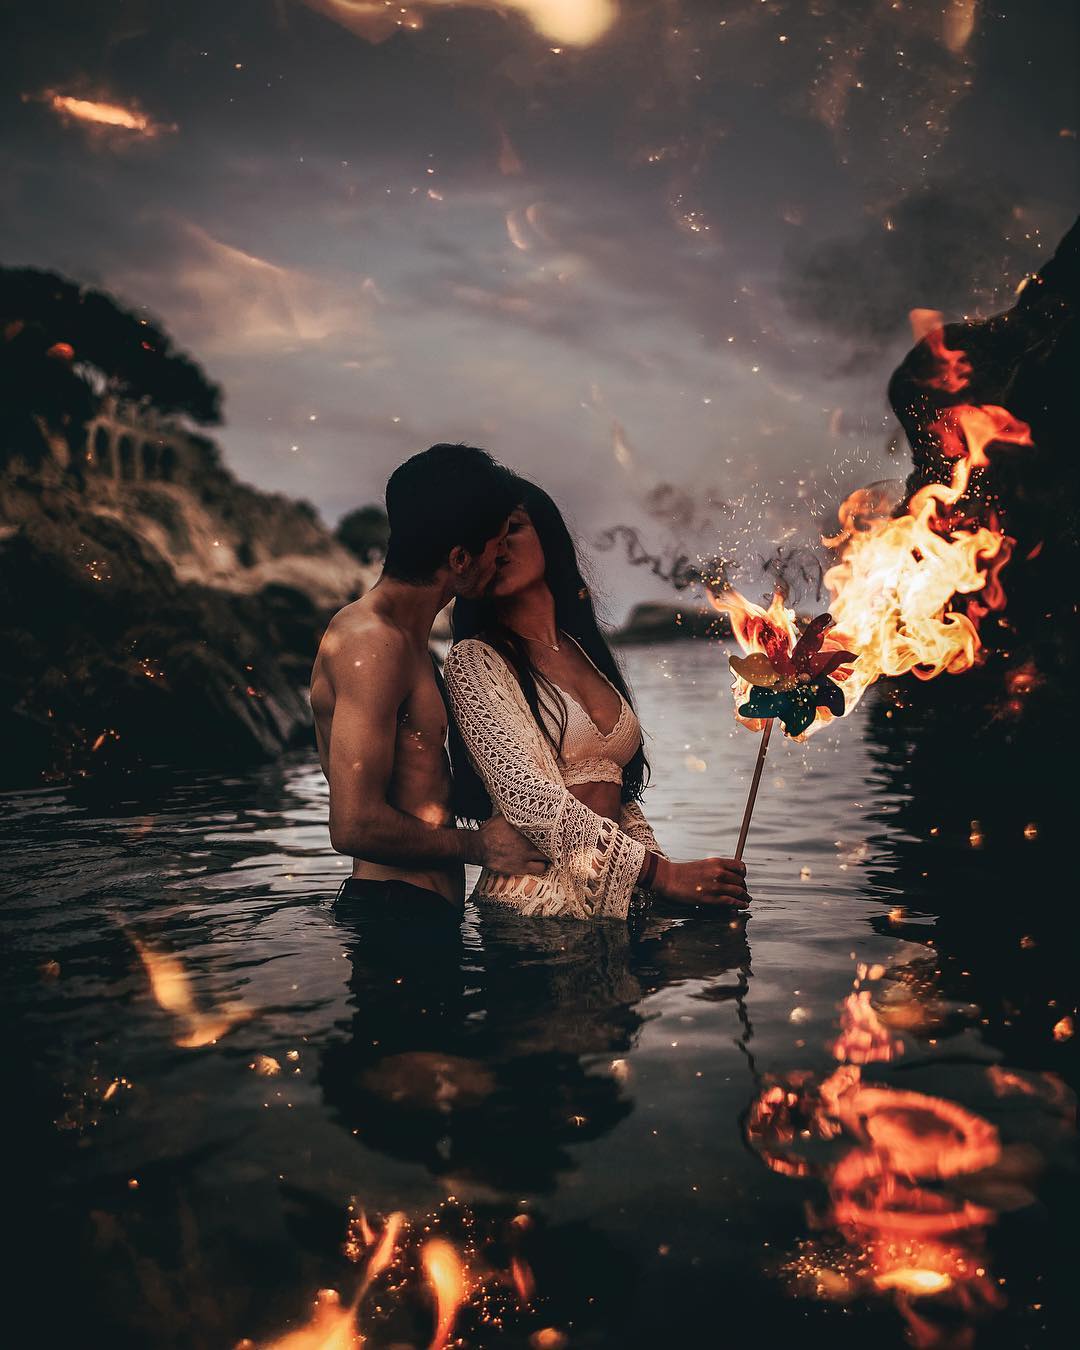 Dramatic Fantasy Portrait Photography The Alluring Beauty Of The Water